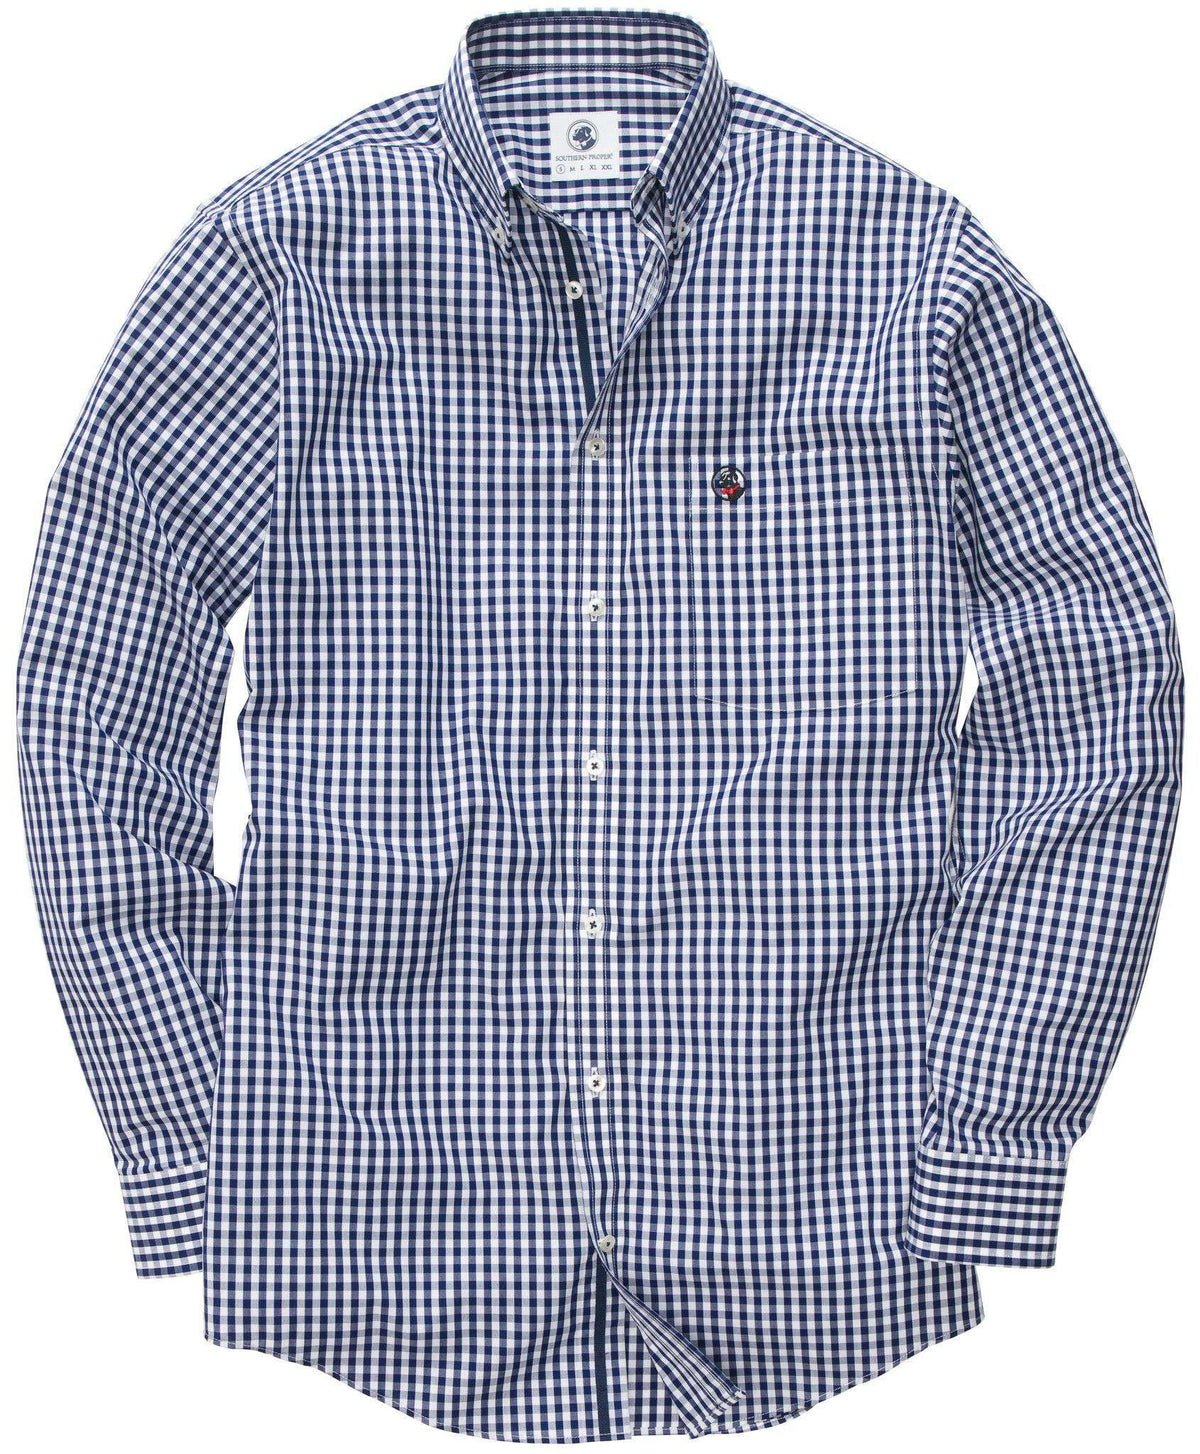 Goal Line Shirt in Navy Gingham by Southern Proper - Country Club Prep